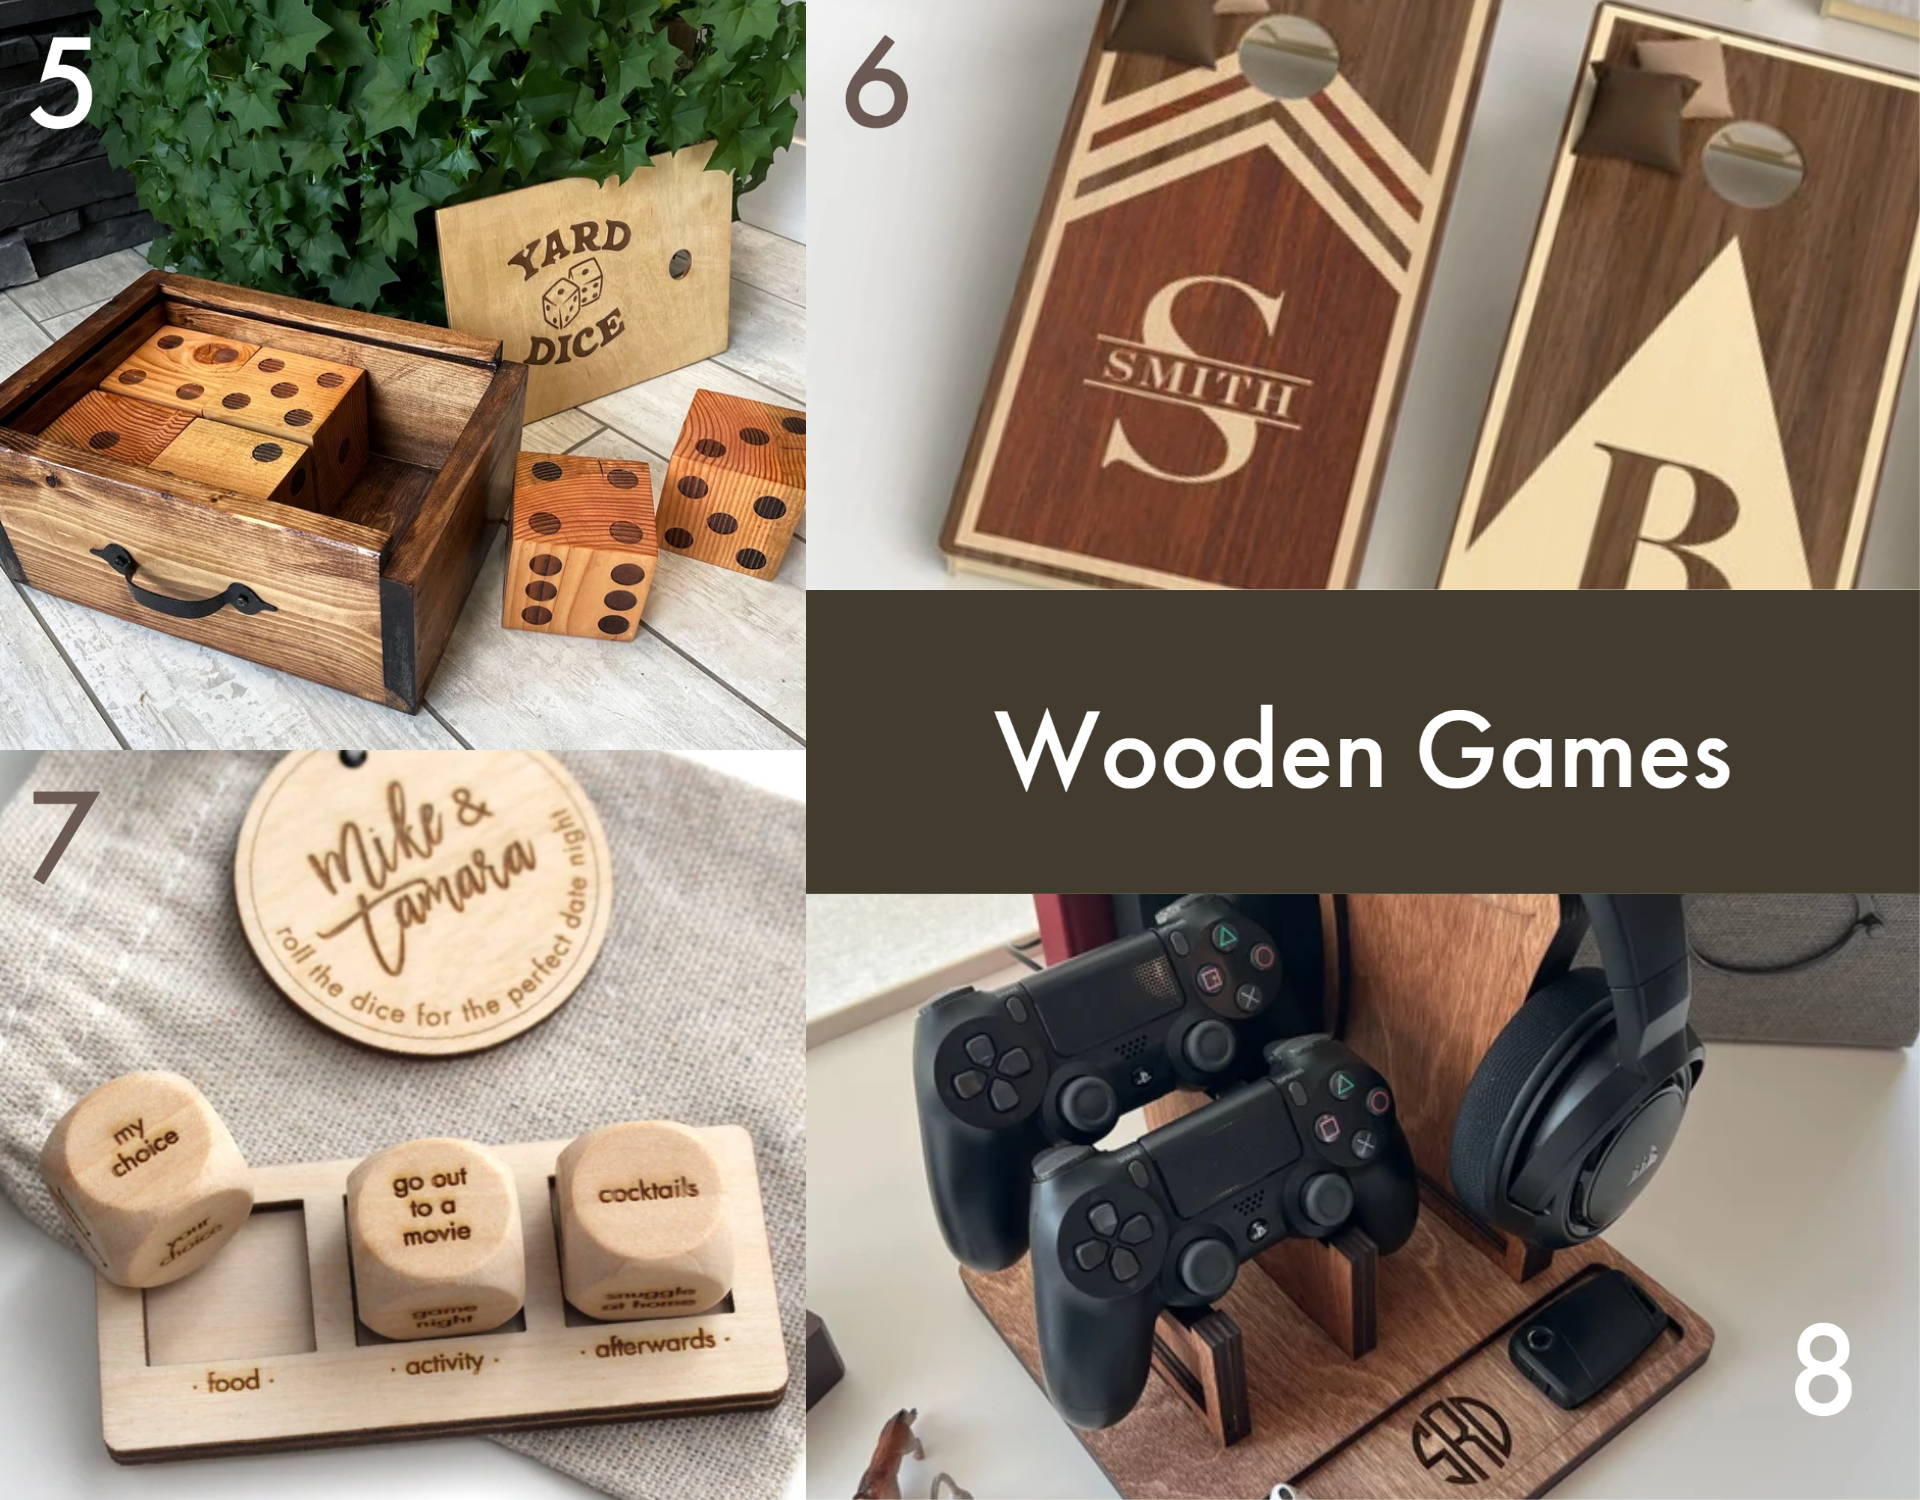 Wooden Games that Make Great Five Year Anniversary Gifts